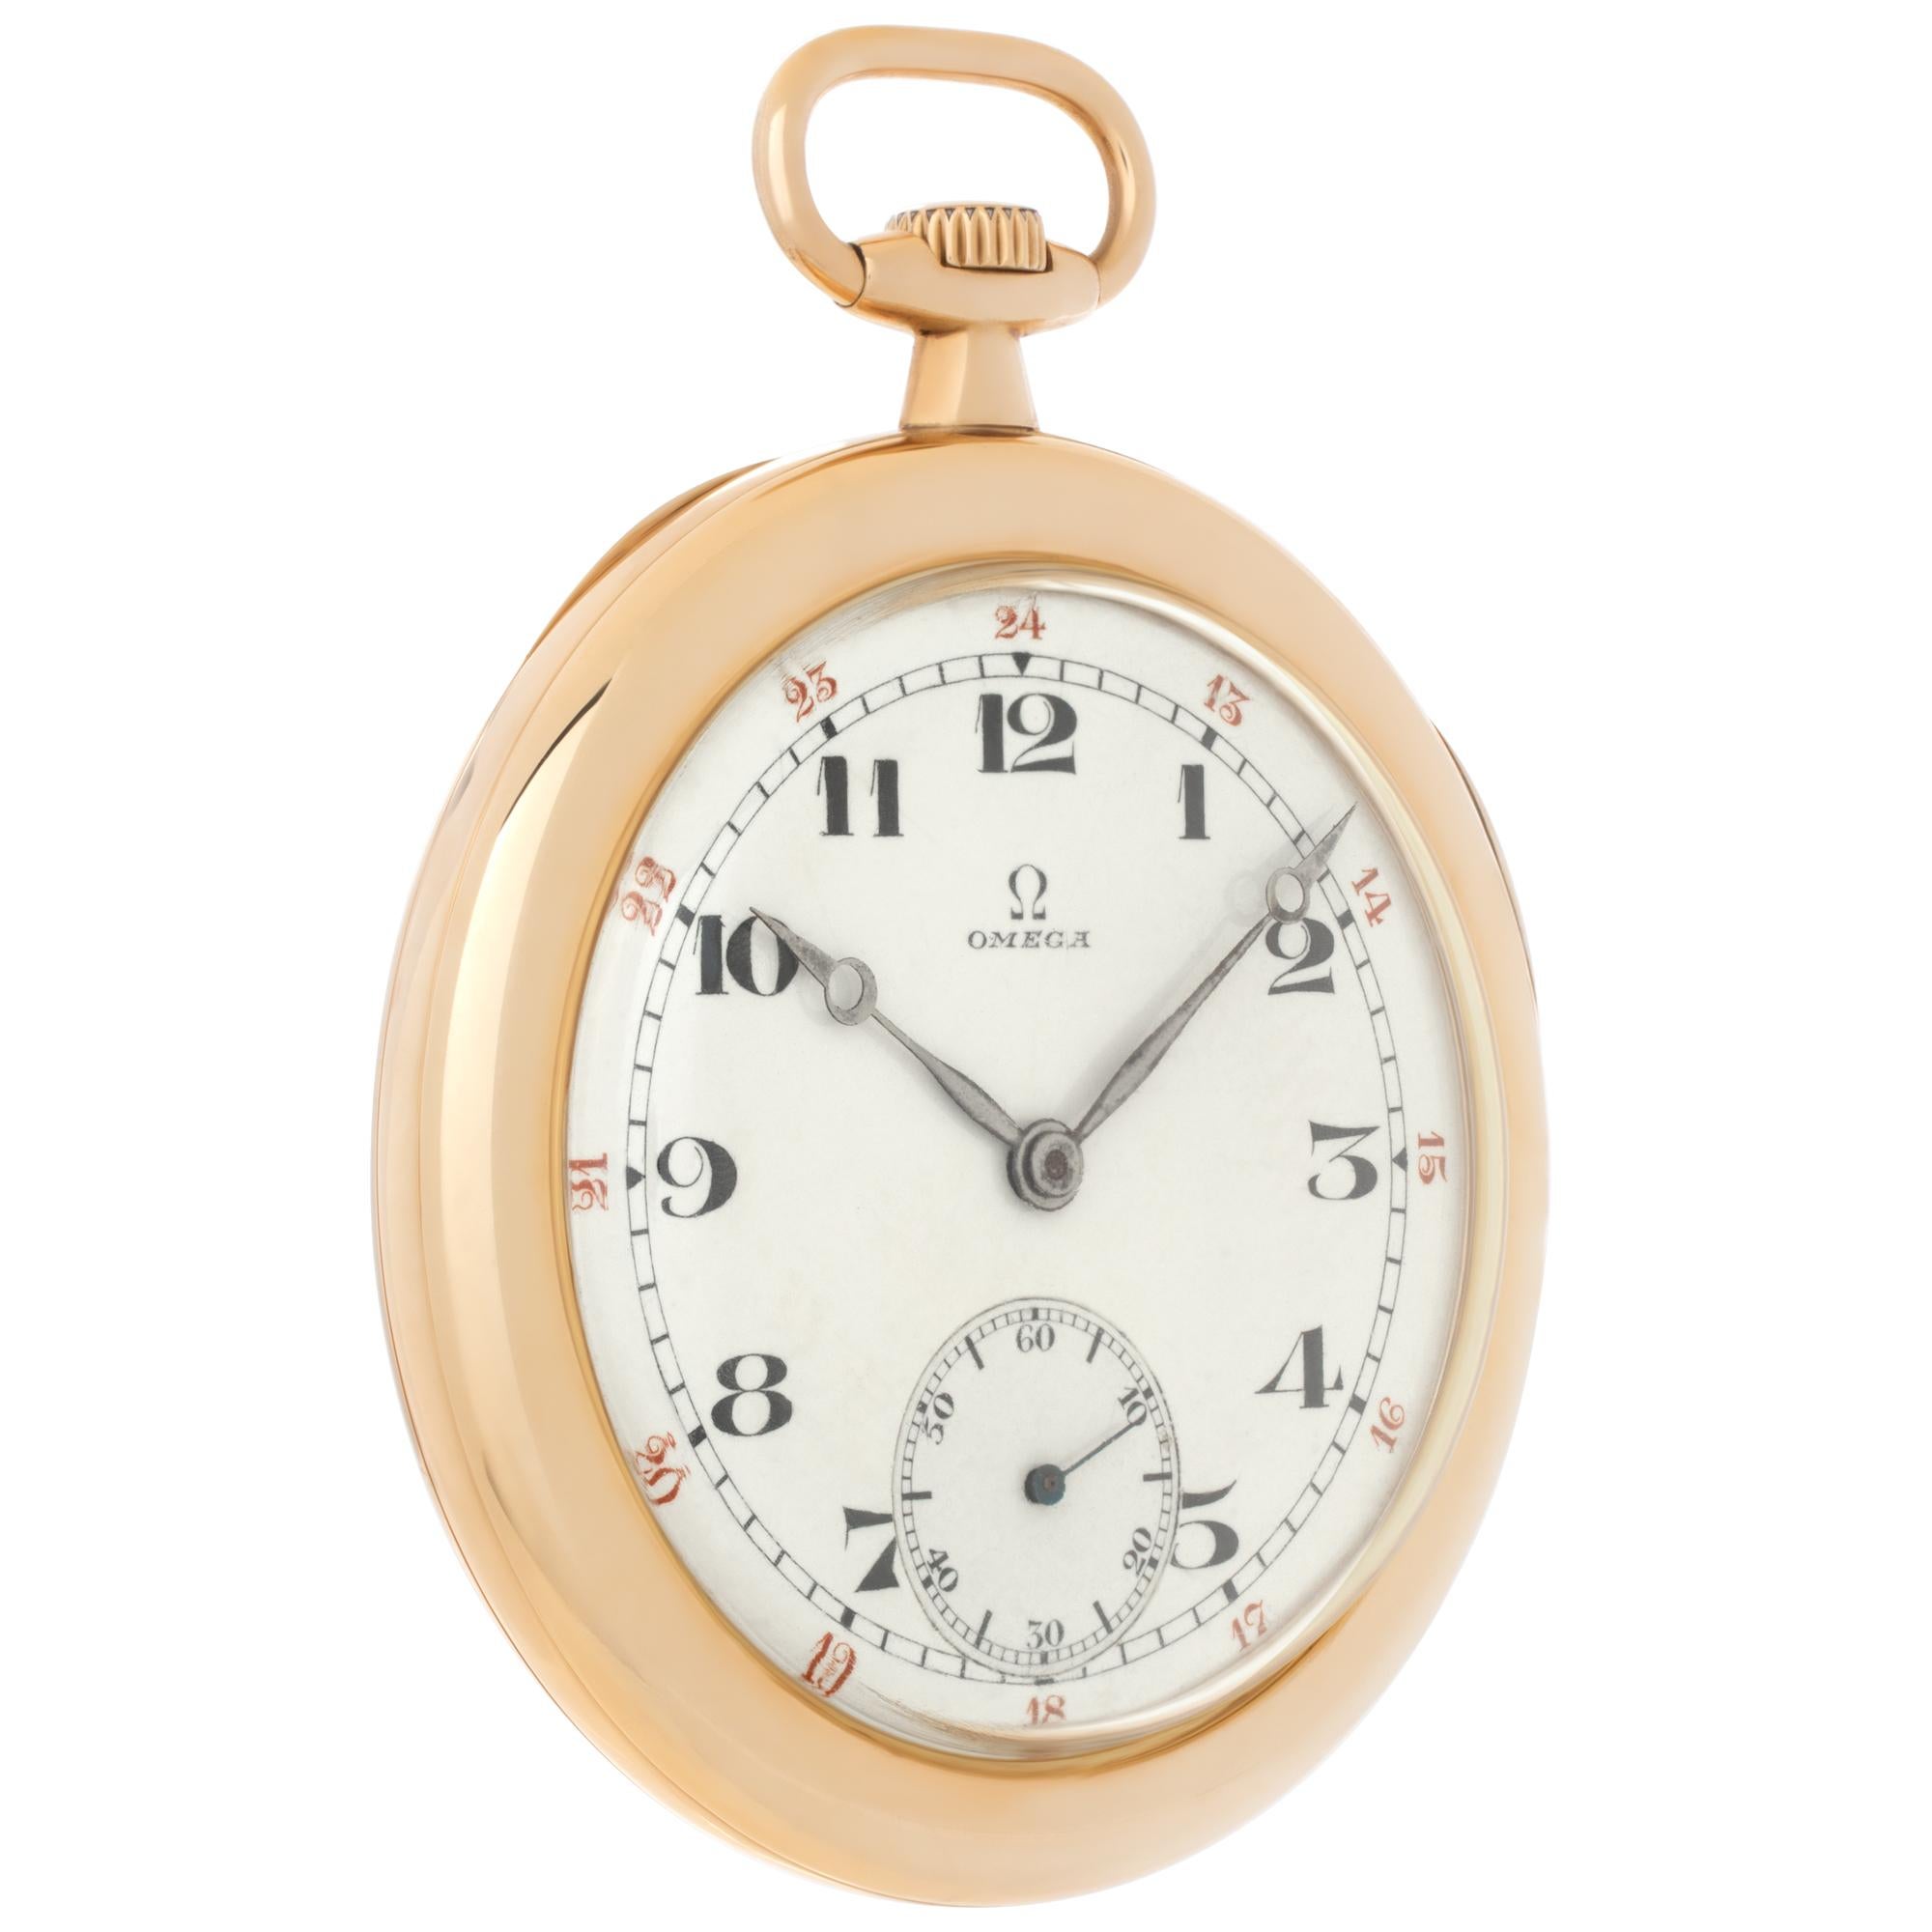 Omega pocket watch in 18k yellow gold with cream dial. Manual with sub-seconds dial. 47 mm case size. Fine Pre-owned Omega Watch. Certified preowned Vintage Omega pocket watch watch is made out of yellow gold. This Omega watch has a 47  x 47 mm 